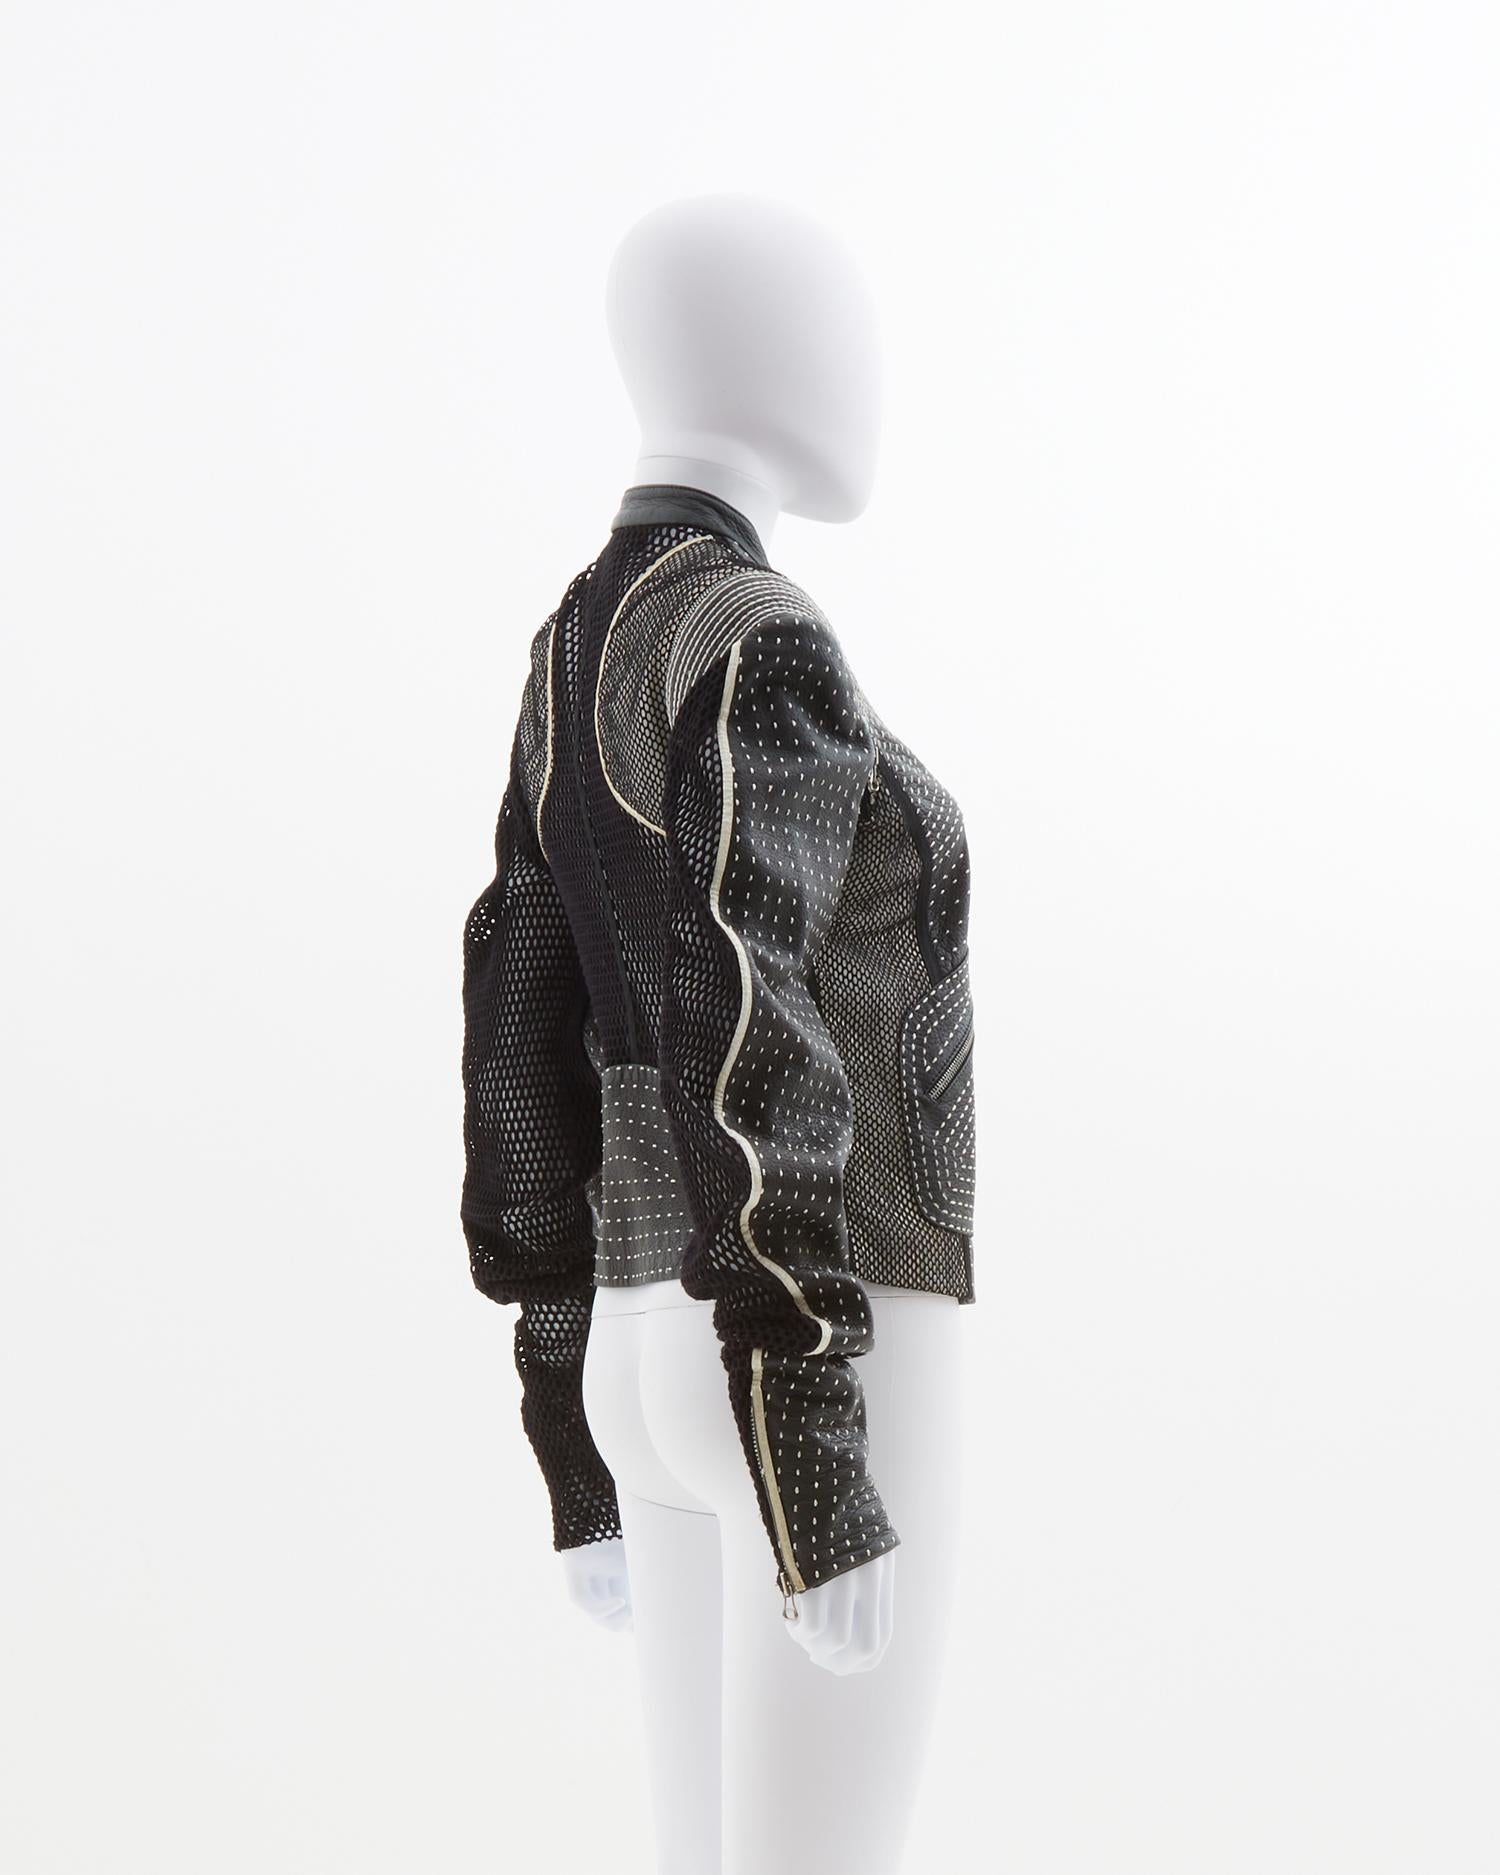 Gianfranco Ferrè Black back netted motorcycle leather jacket, early 2000s For Sale 1